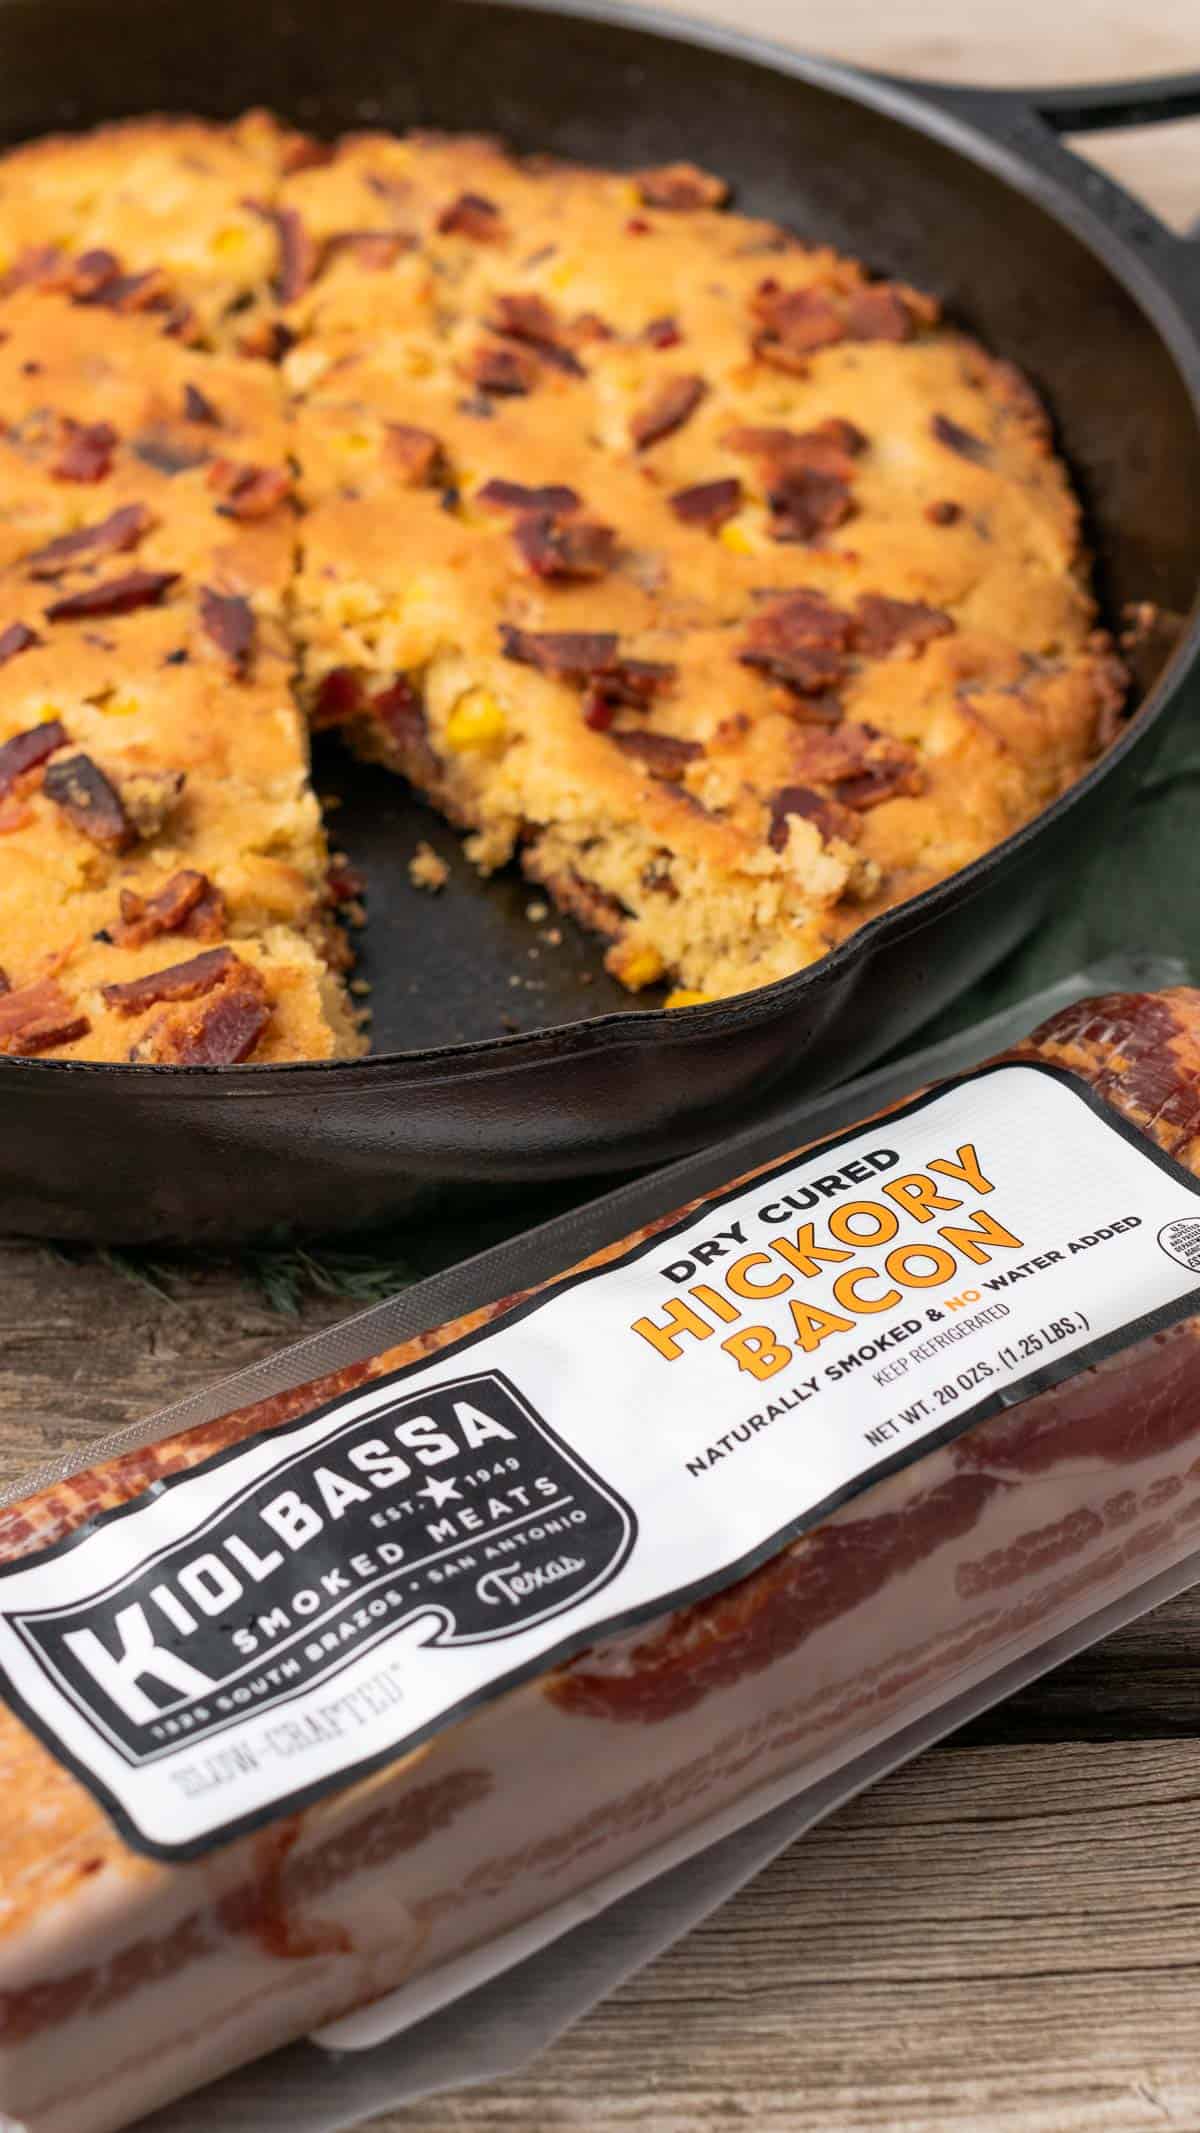 kiolbassa smoked meats hickory smoked bacon with a skillet of brown butter bacon cornbread in the background